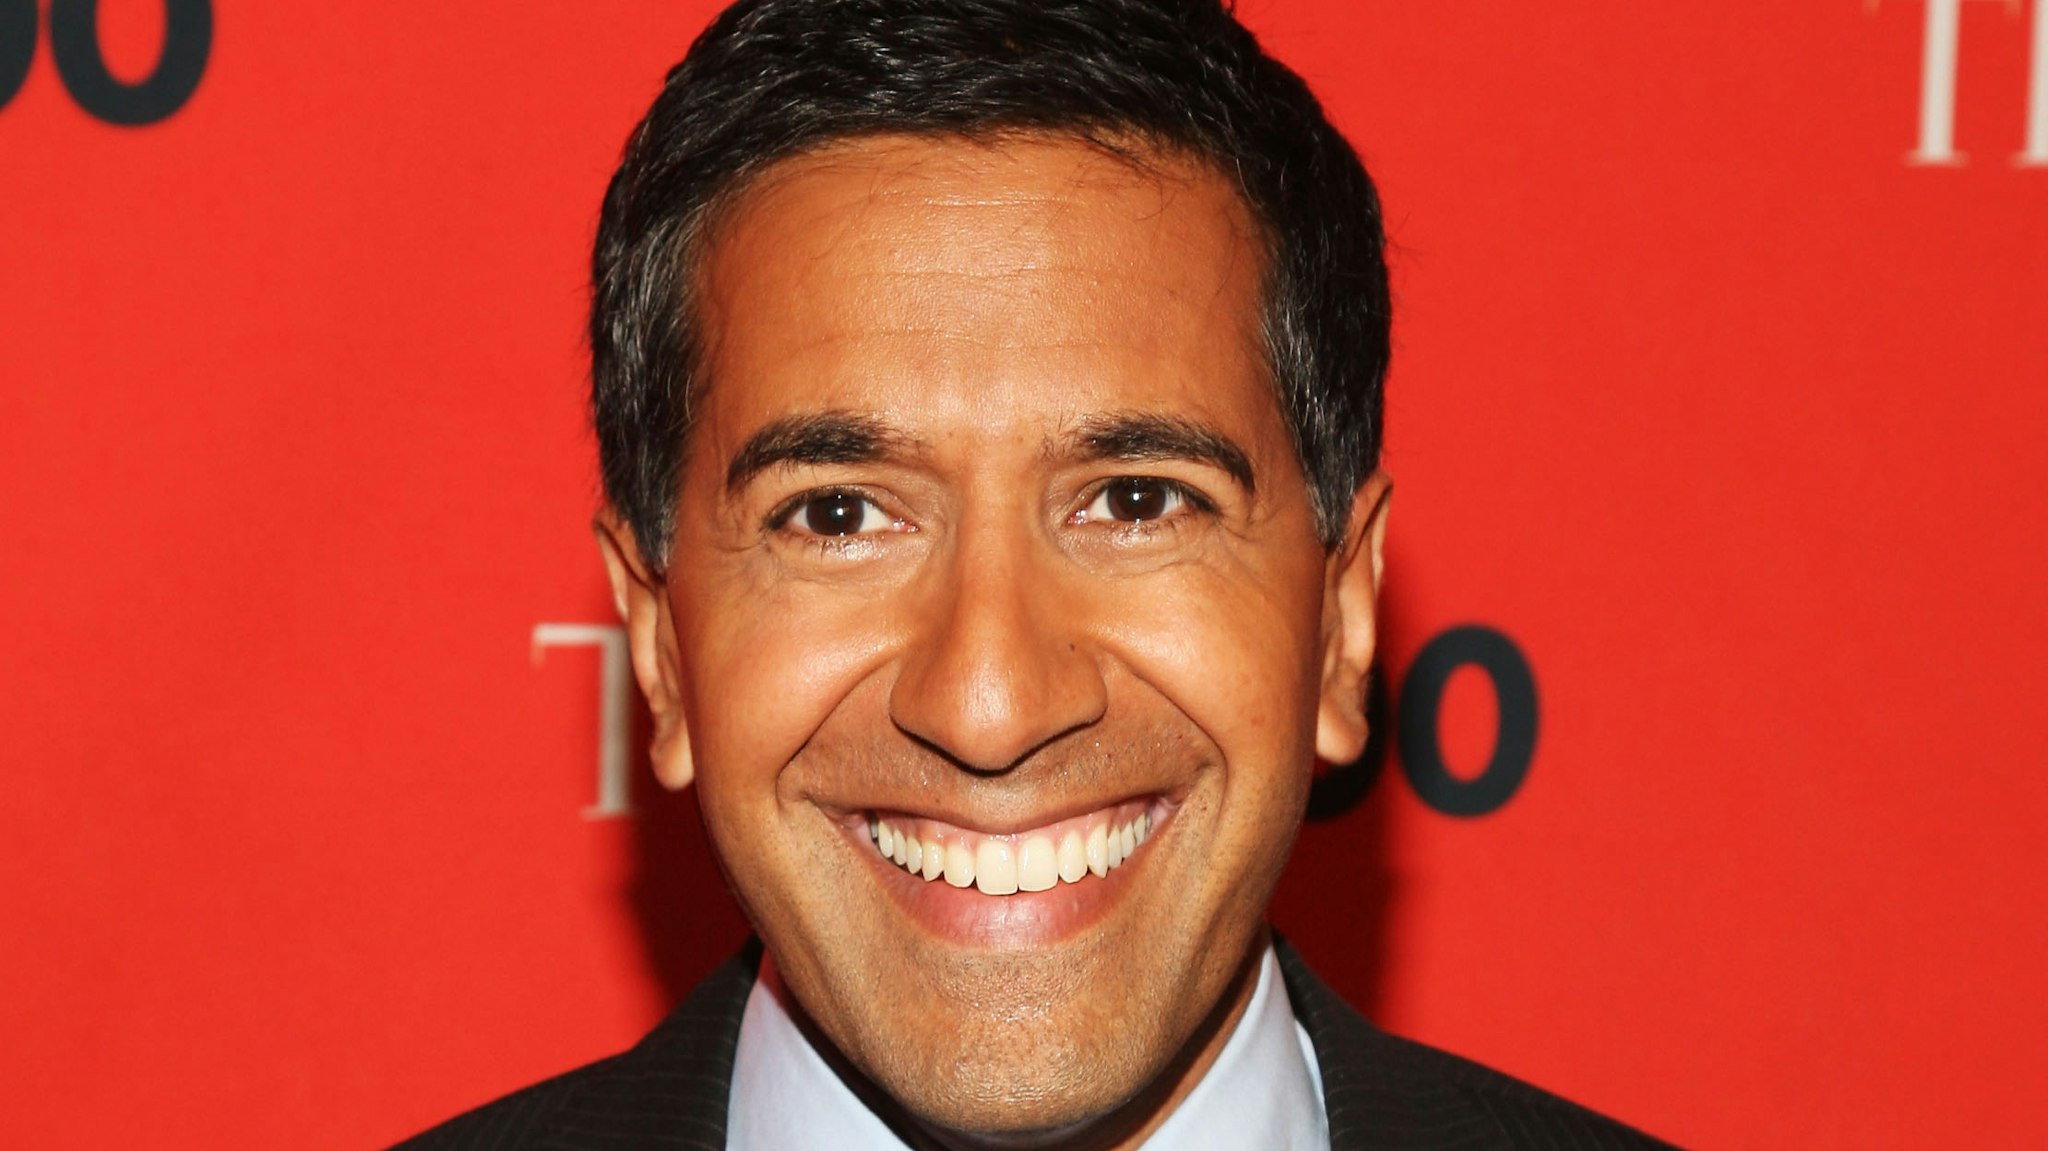 NEW YORK - MAY 05: CNN's chief medical correspondent Dr. Sanjay Gupta attends Time's 100 Most Influential People in the World Gala at the Frederick P. Rose Hall at Jazz at Lincoln Center on May 5, 2009 in New York City.